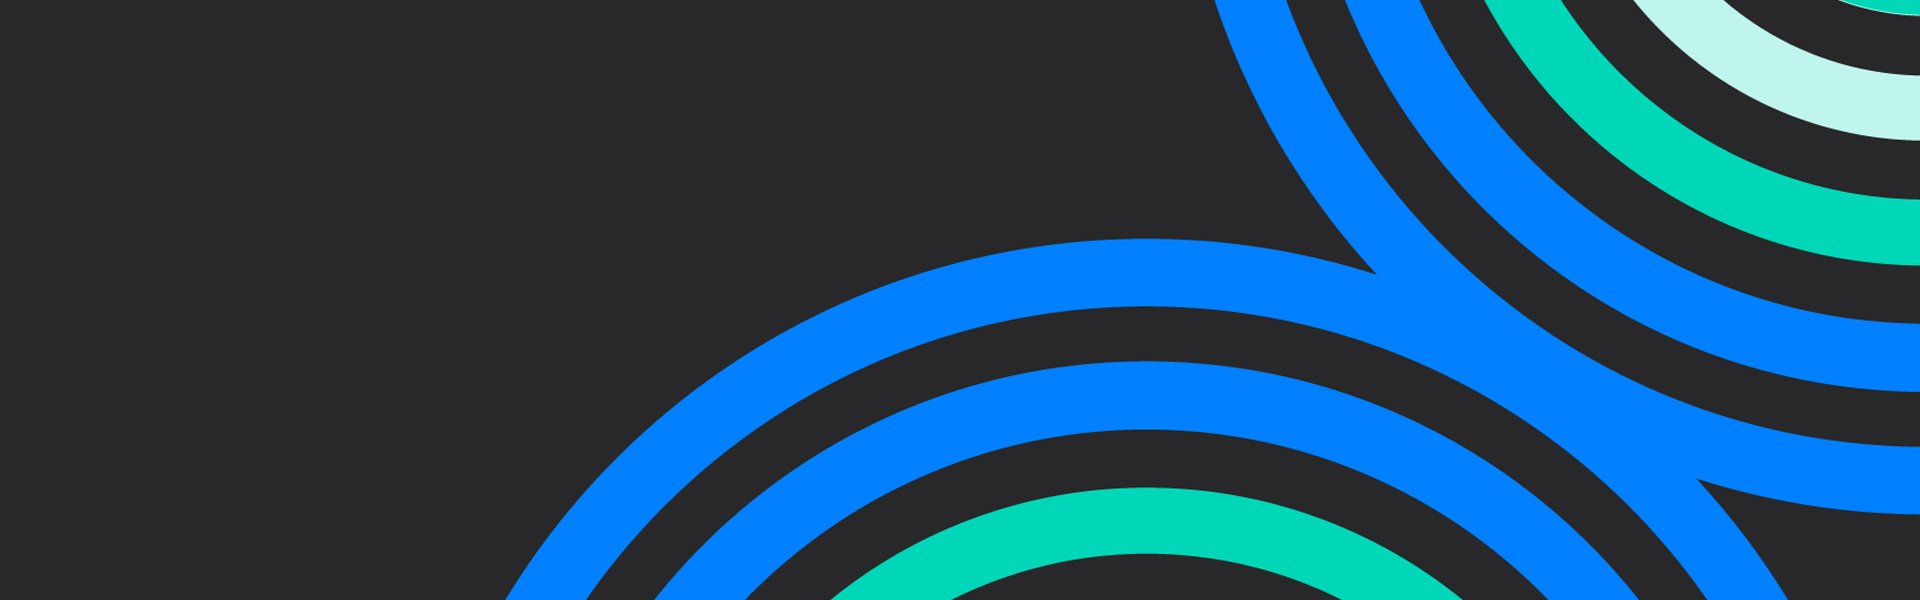 Black background with blue and teal spirals